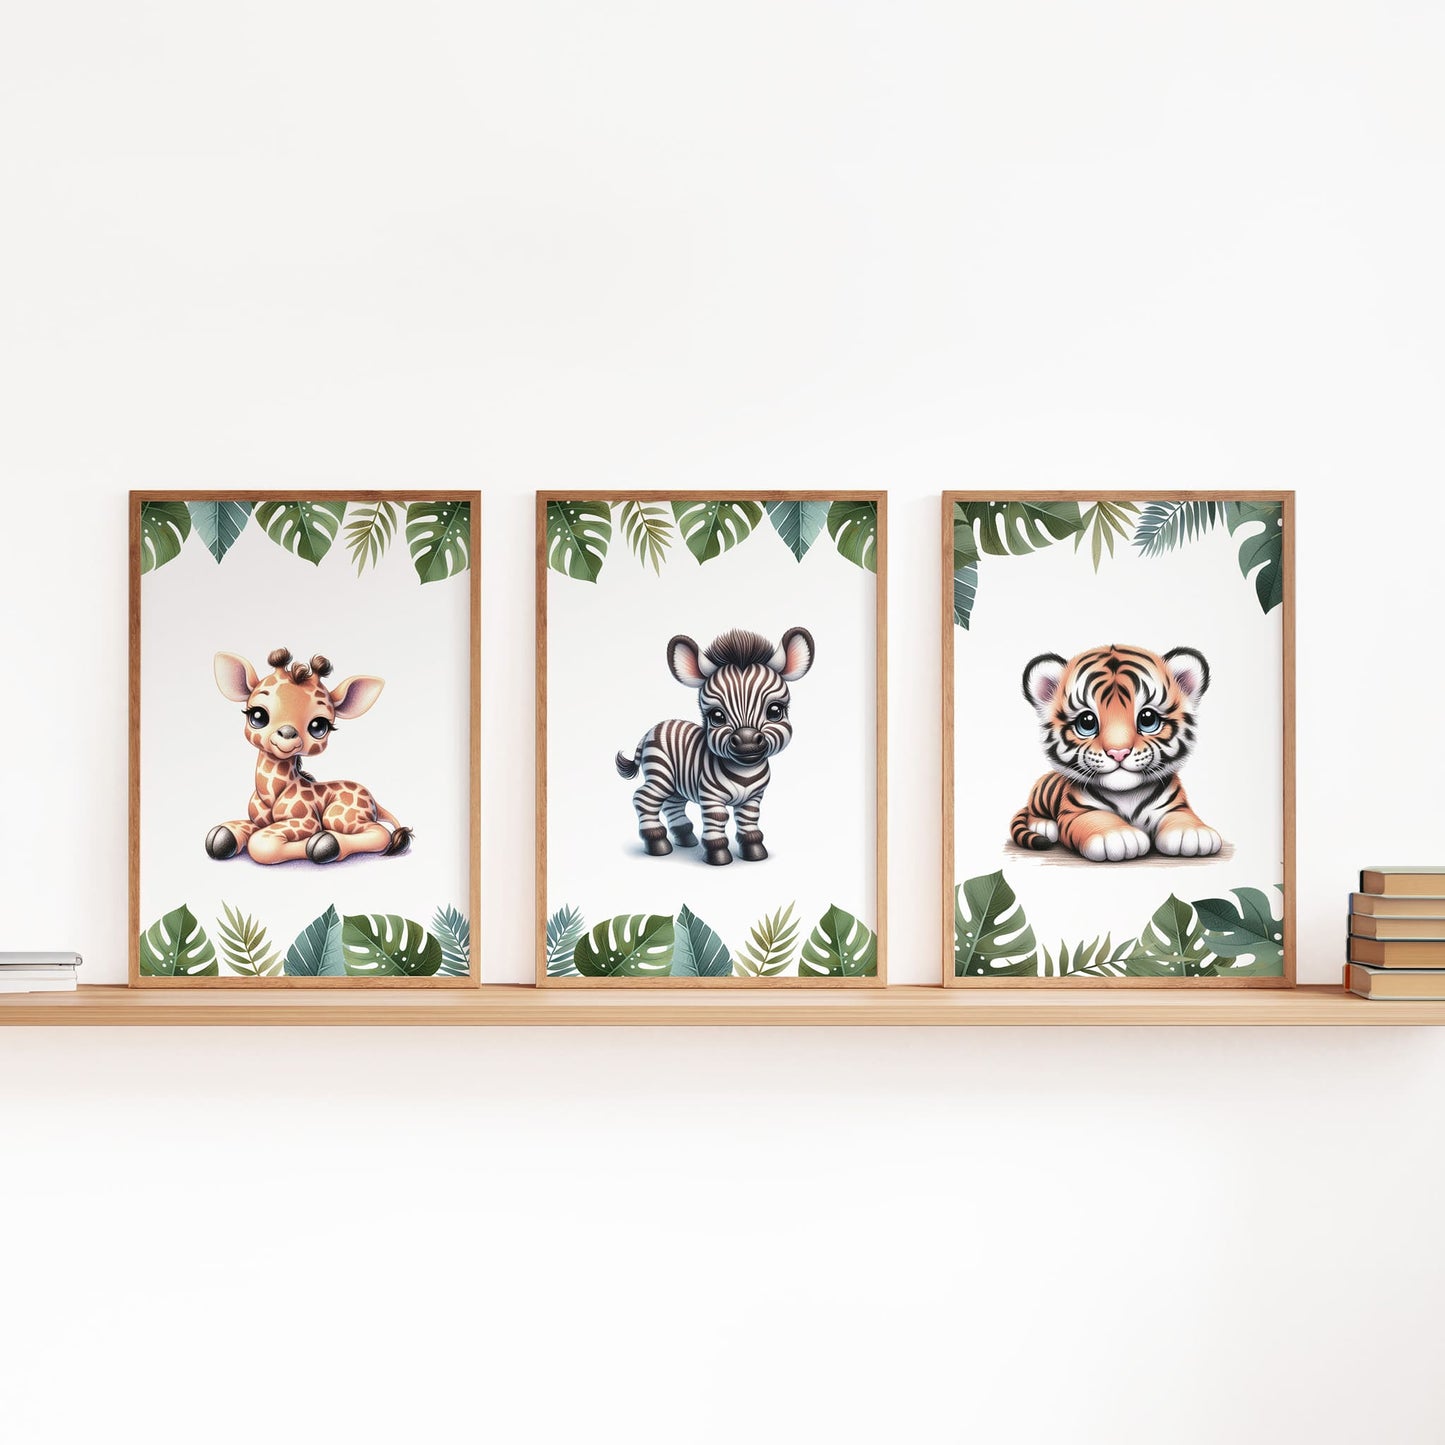 Second three of a set of six A4 prints featuring safari animals - lion cub, tiger cub, cheetah cub, elephant, giraffe, and zebra. The animals are depicted as baby animals, in a cartoony and bright style reminiscent of coloured pencil drawings. Jungle-style leaves adorn the edges of the prints.